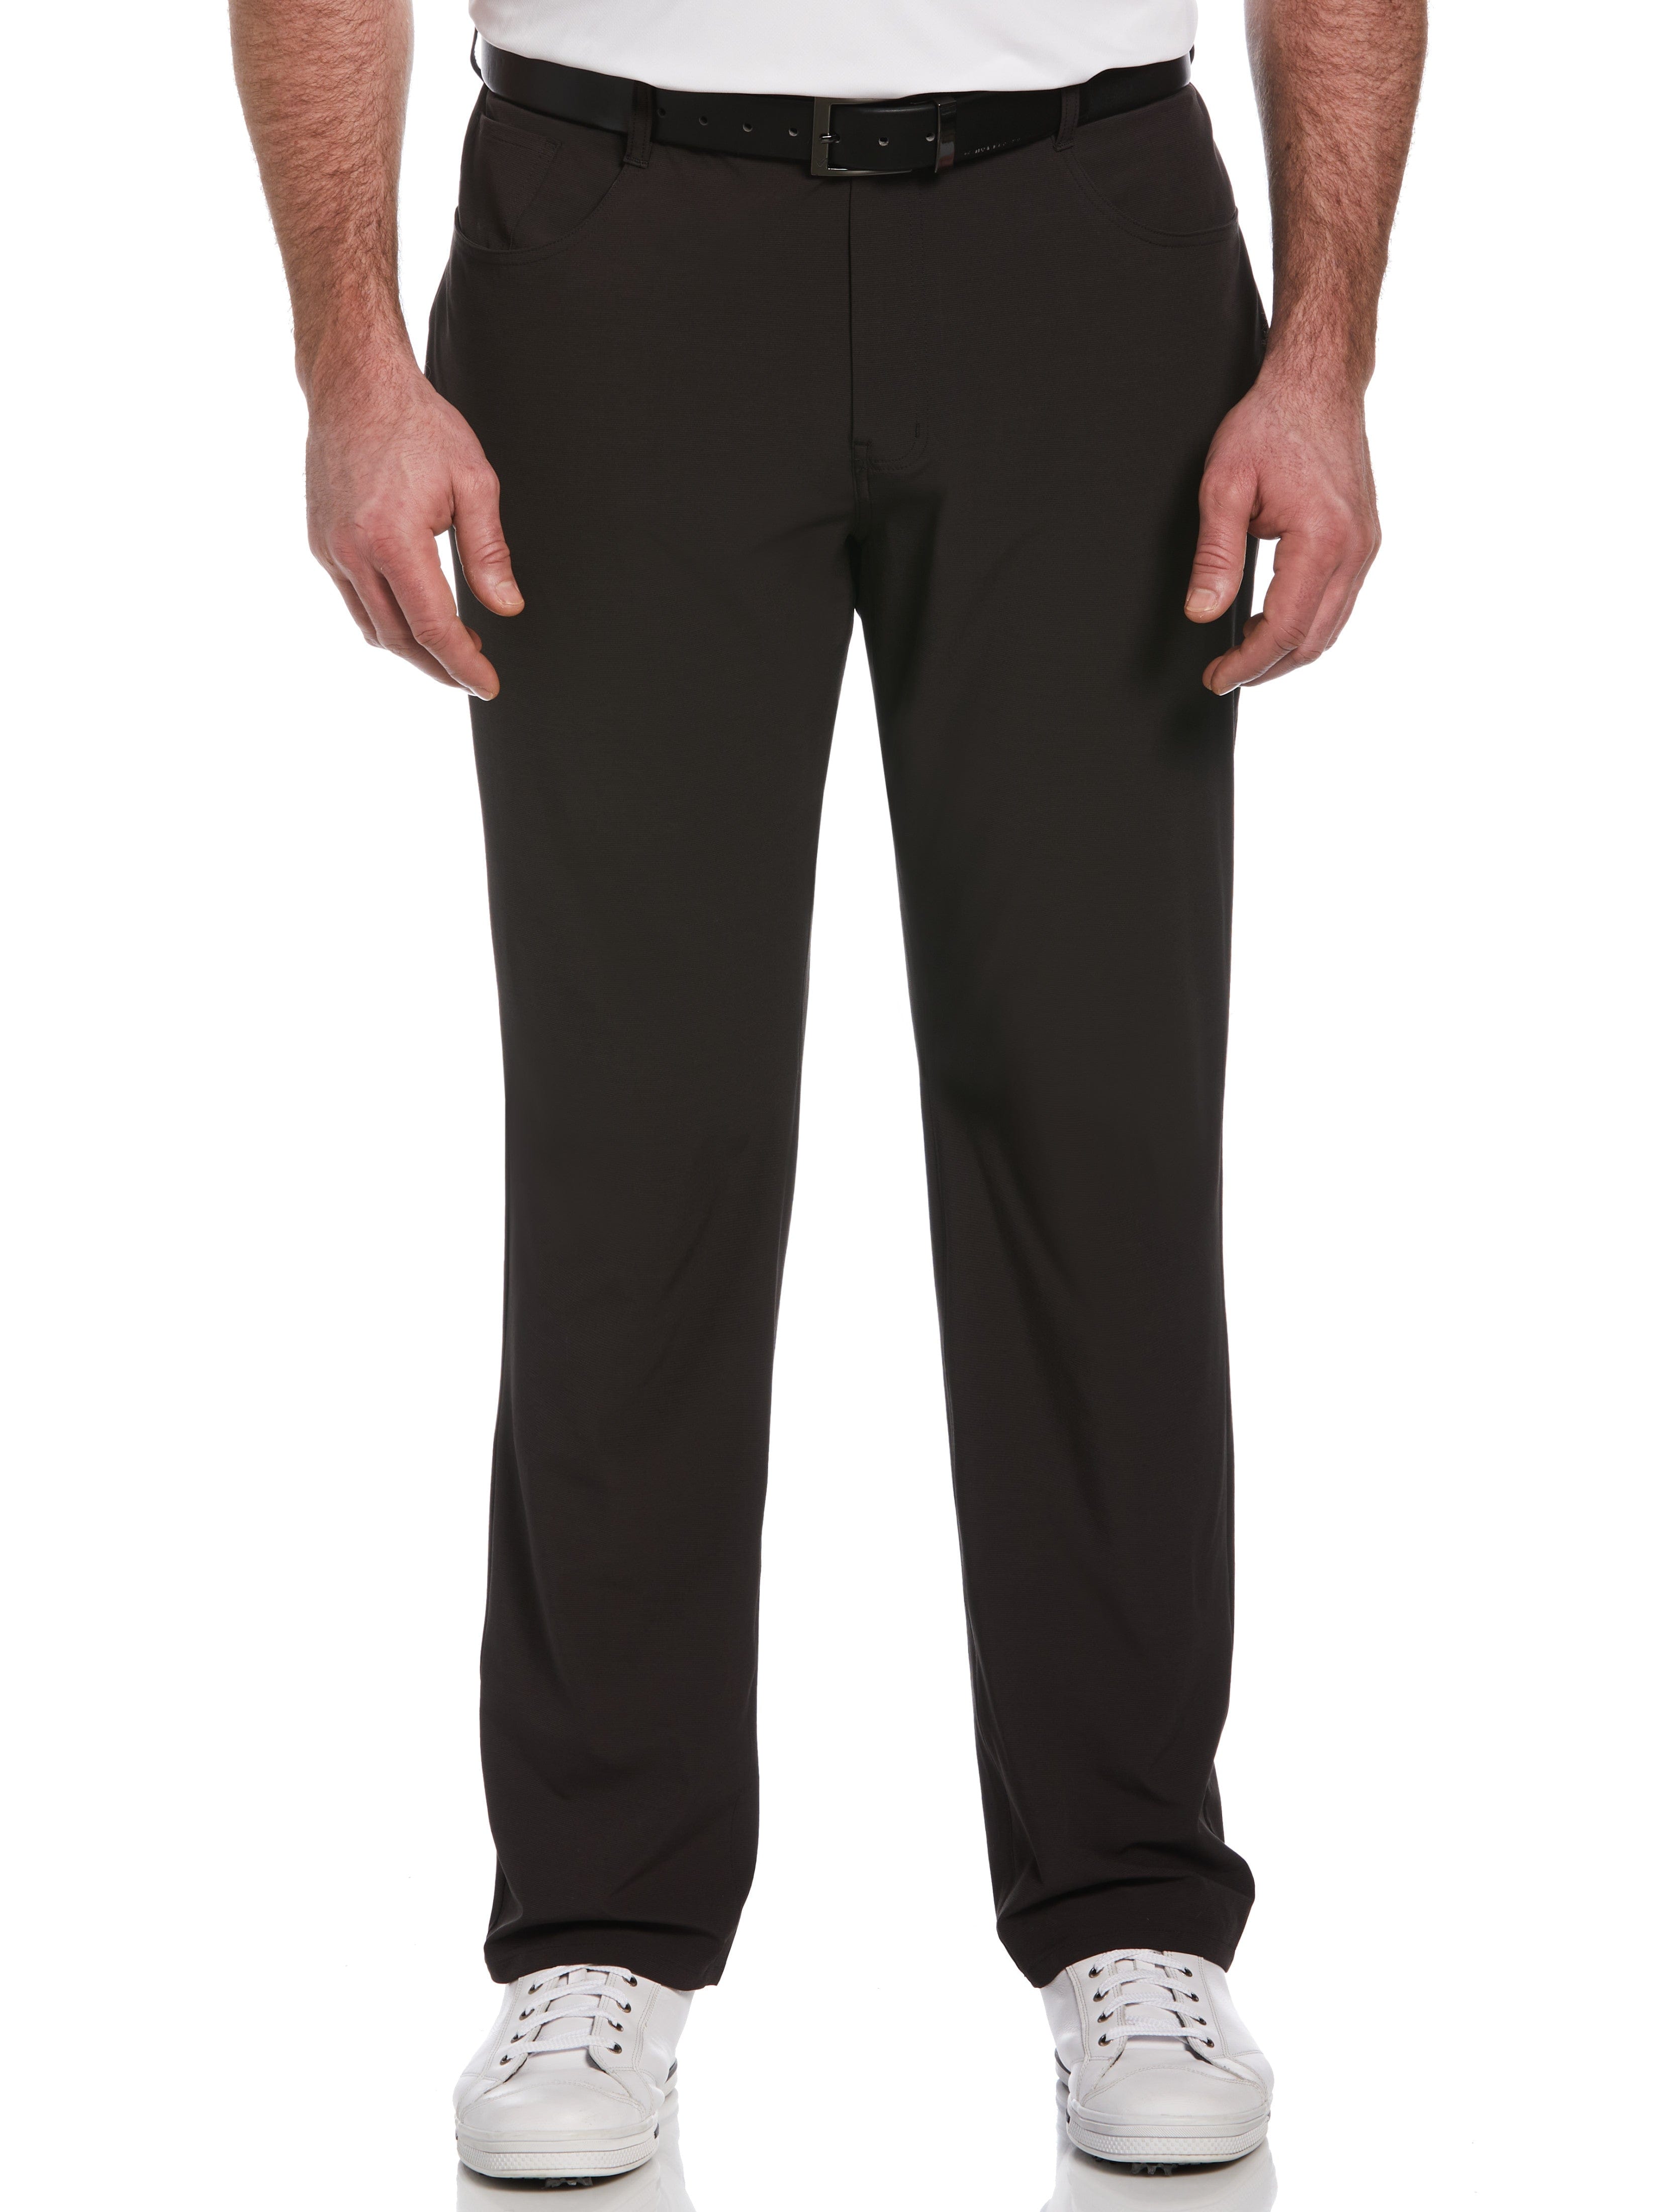 Breathable Lightweight Mens Golf Slacks For Men For Autumn Moisture Wick  Design, Quick Drying, And Stylish Golf Trousers From Luxurious66, $28.43 |  DHgate.Com